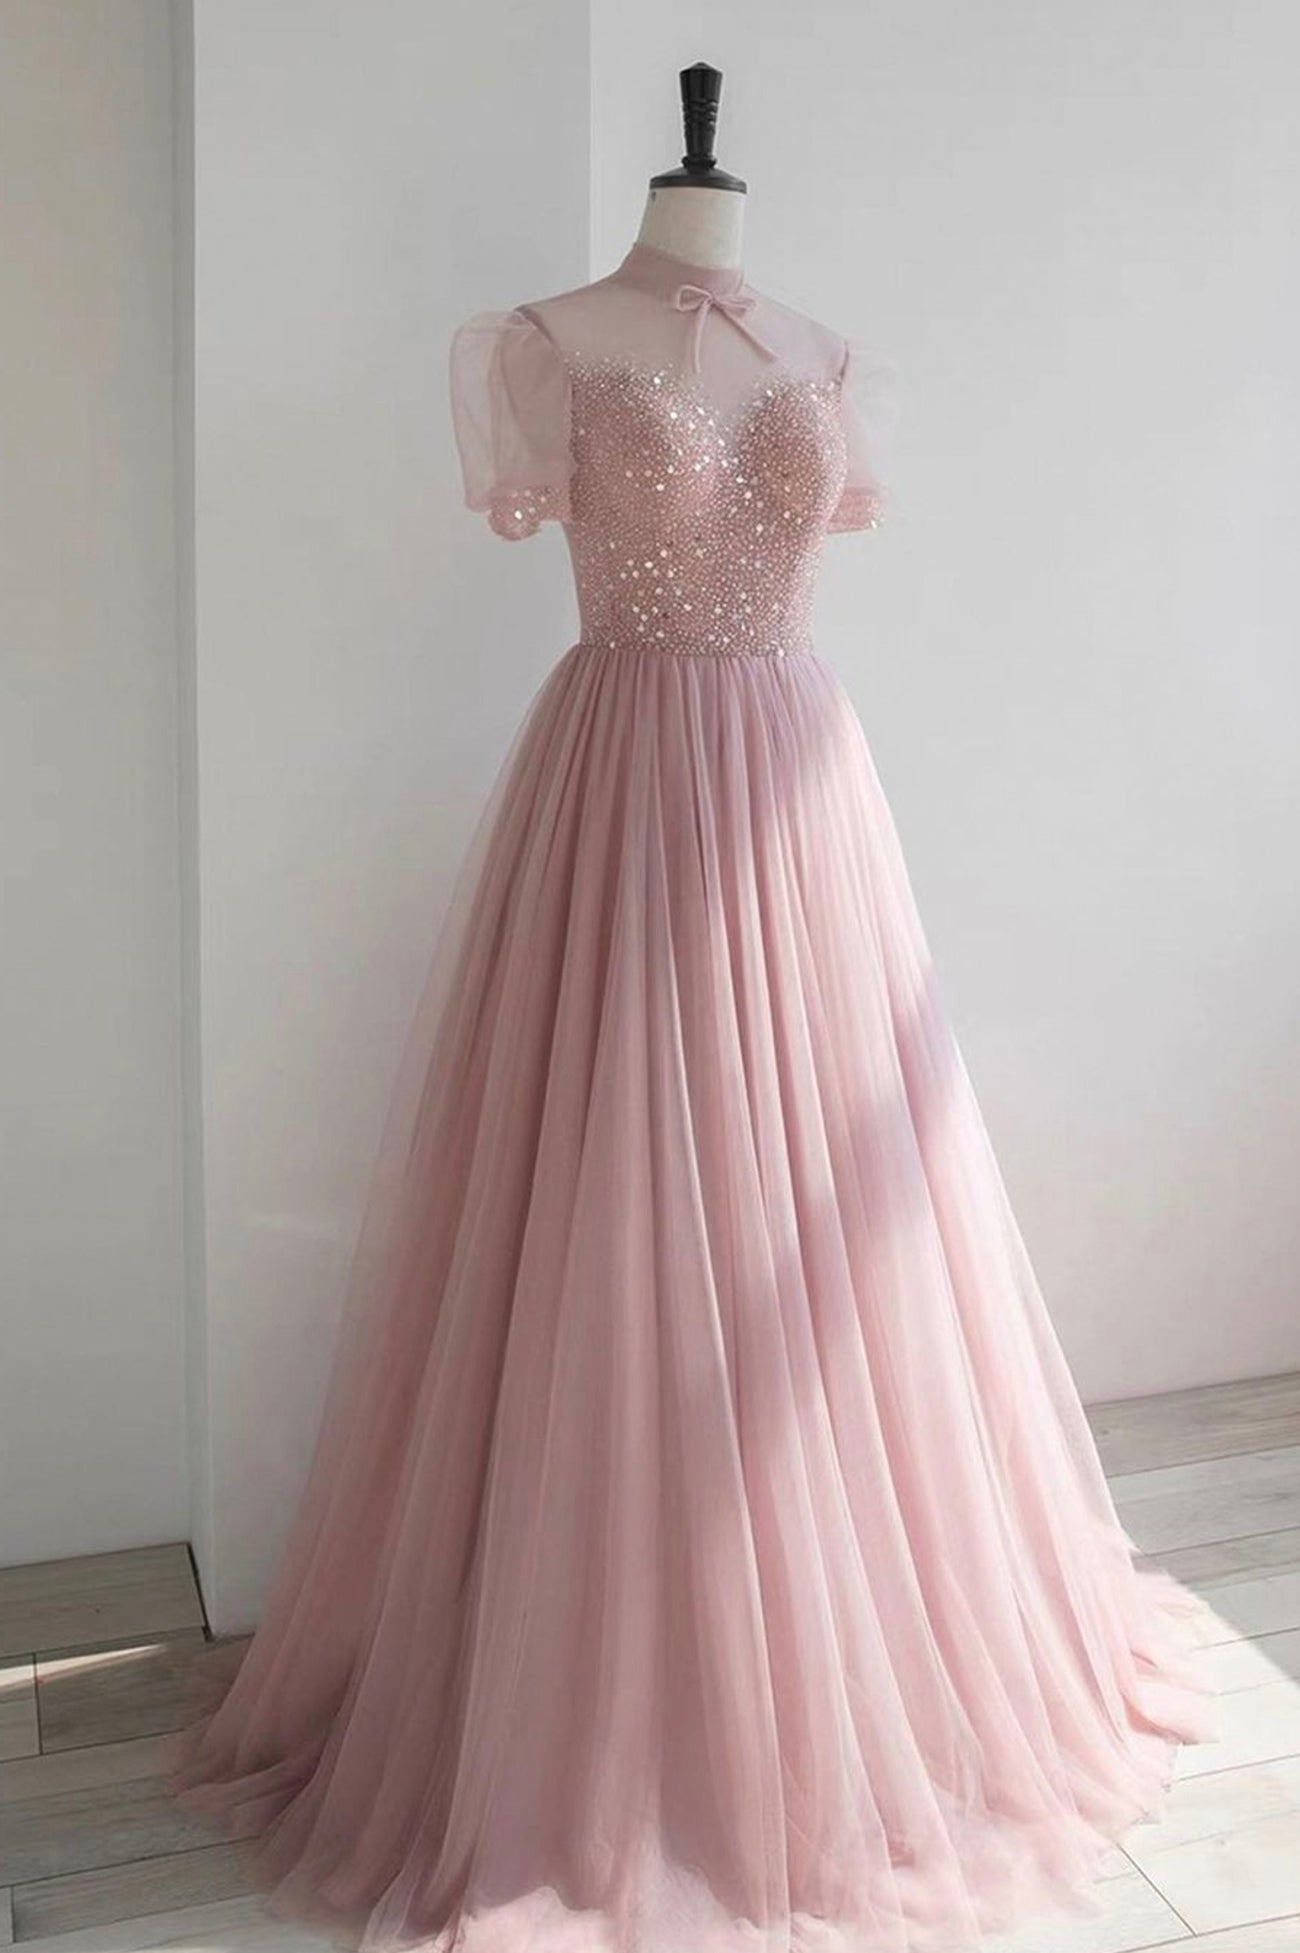 Homecomming Dresses Floral, Pink Tulle Beading Long Prom Dresses, Lovely A-Line Evening Party Dresses